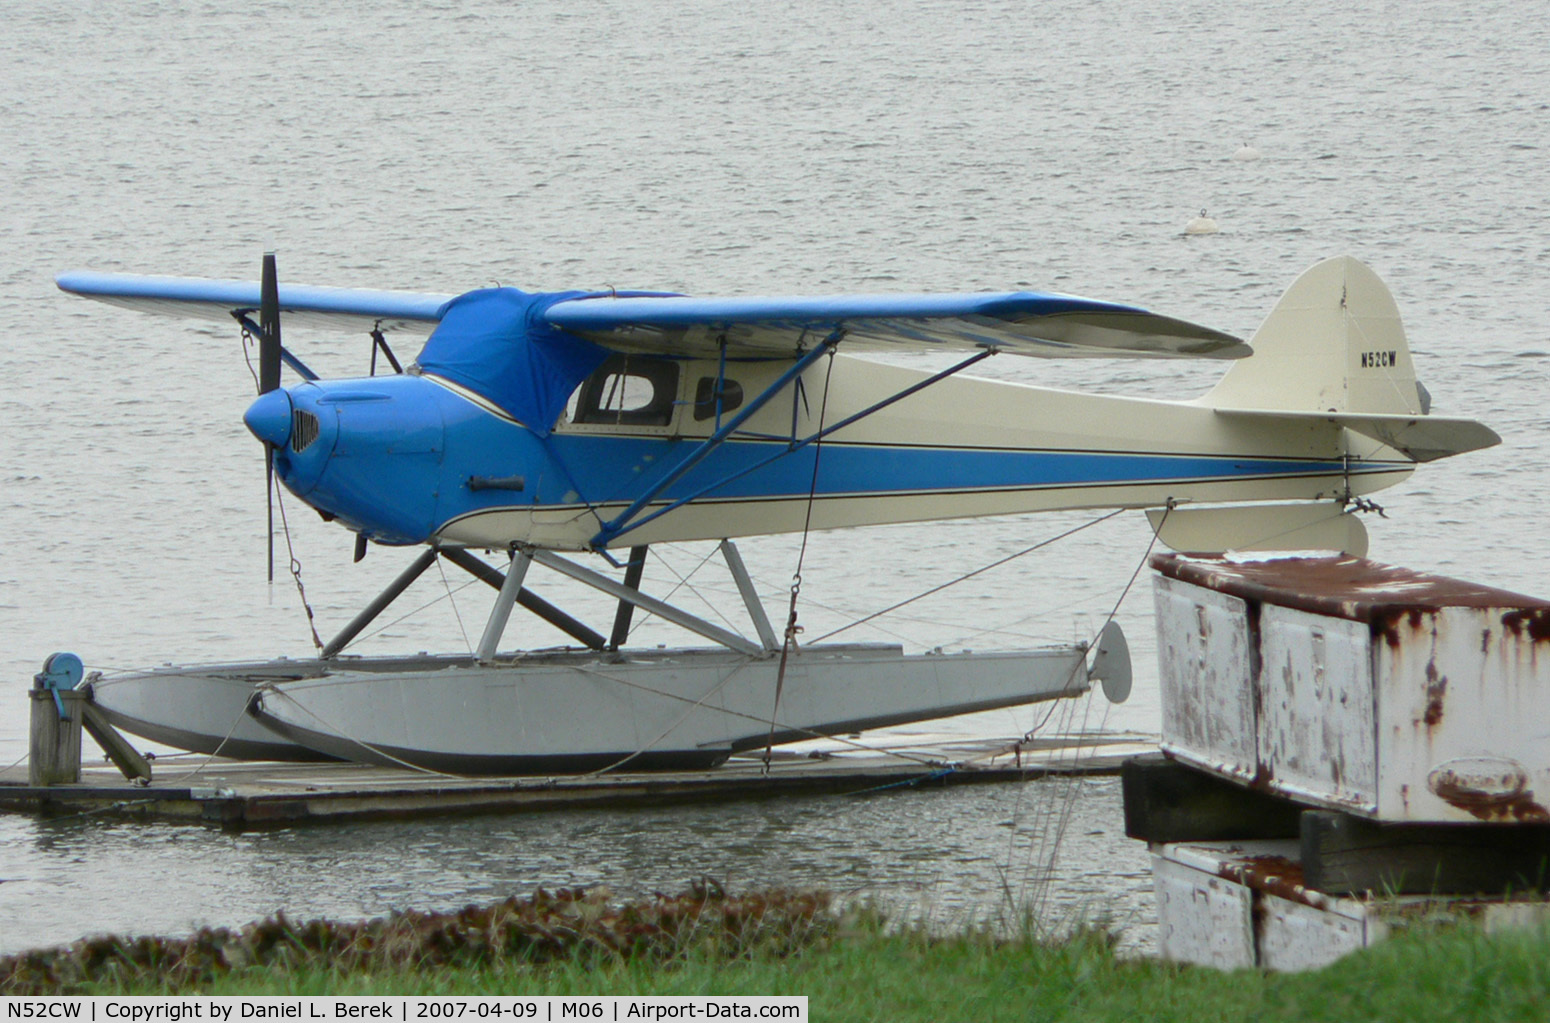 N52CW, 1946 Taylorcraft BC-65 C/N 1716, This lovely Taylorcraft floatplane calls the beautiful town of Havre de Grace, MD, home.